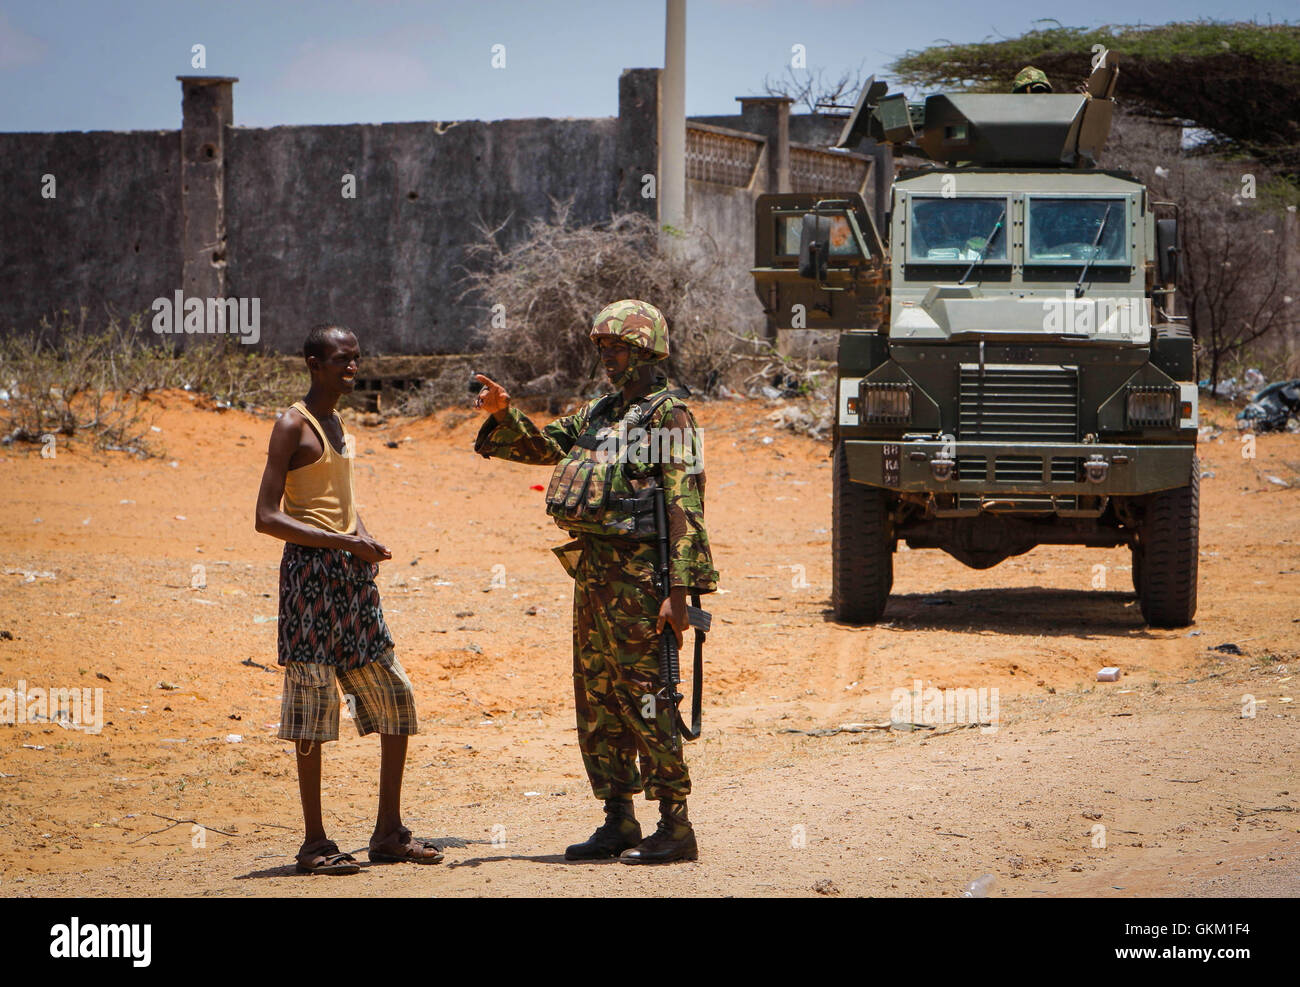 SOMALIA, Kismayo: In a handout photograph taken 05 October and released by the African Union-United Nations Information Support Team 06 October, a soldier serving with the Kenyan Contingent of the African Union Mission in Somalia (AMISOM) gestures as he talks to a Somali man at the roadside in the southern Somali port city of Kismayo. The last bastion of the once feared Al-Qaeda-affiliated extremist group Al Shabaab, Kismayo fell after troops of the Somali National Army (SNA) and the pro-government Ras Kimboni Brigade supported by Kenyan AMISOM forces entered the port city on 02 October follow Stock Photo